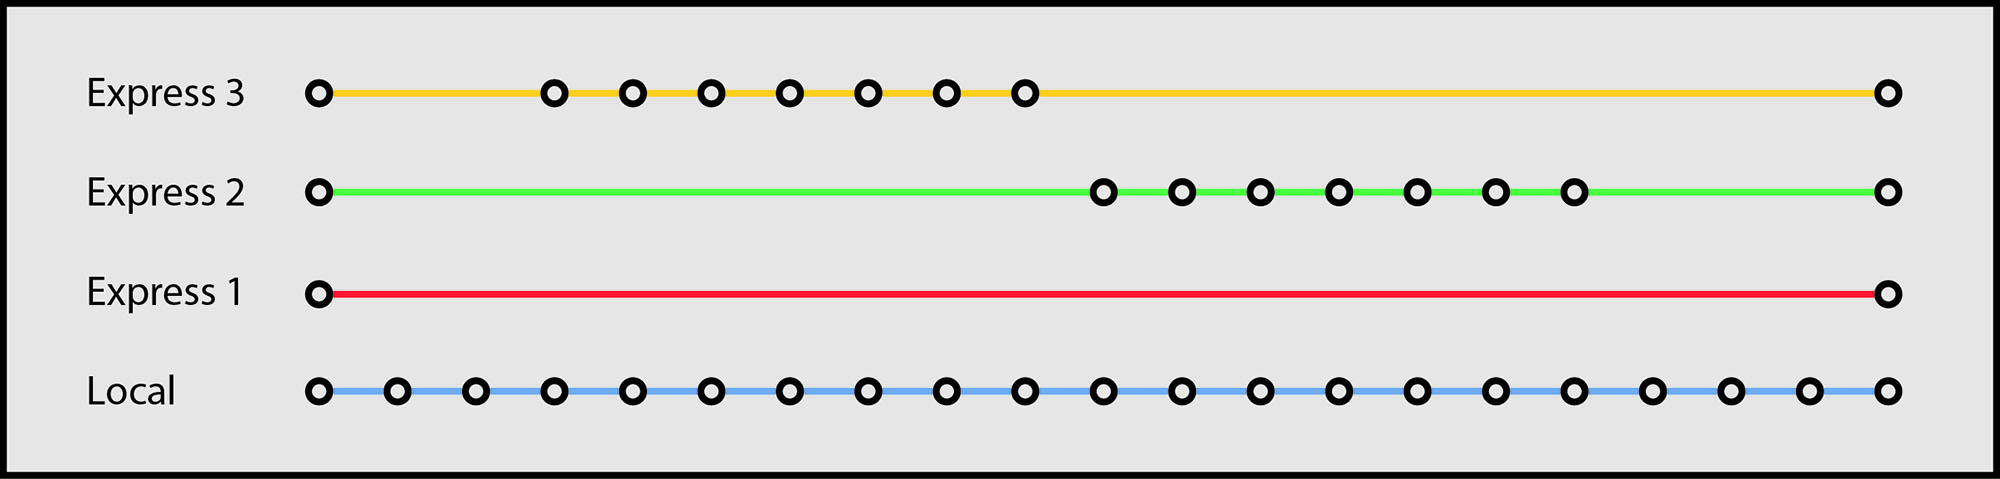 Fig. 6.66 Diagram of original service concept for TransMilenio, based on the concept of clustering stations served by express services (each dot is a served station). It included three express services in order to place each service frequency in the range of optimal frequencies. Diagram